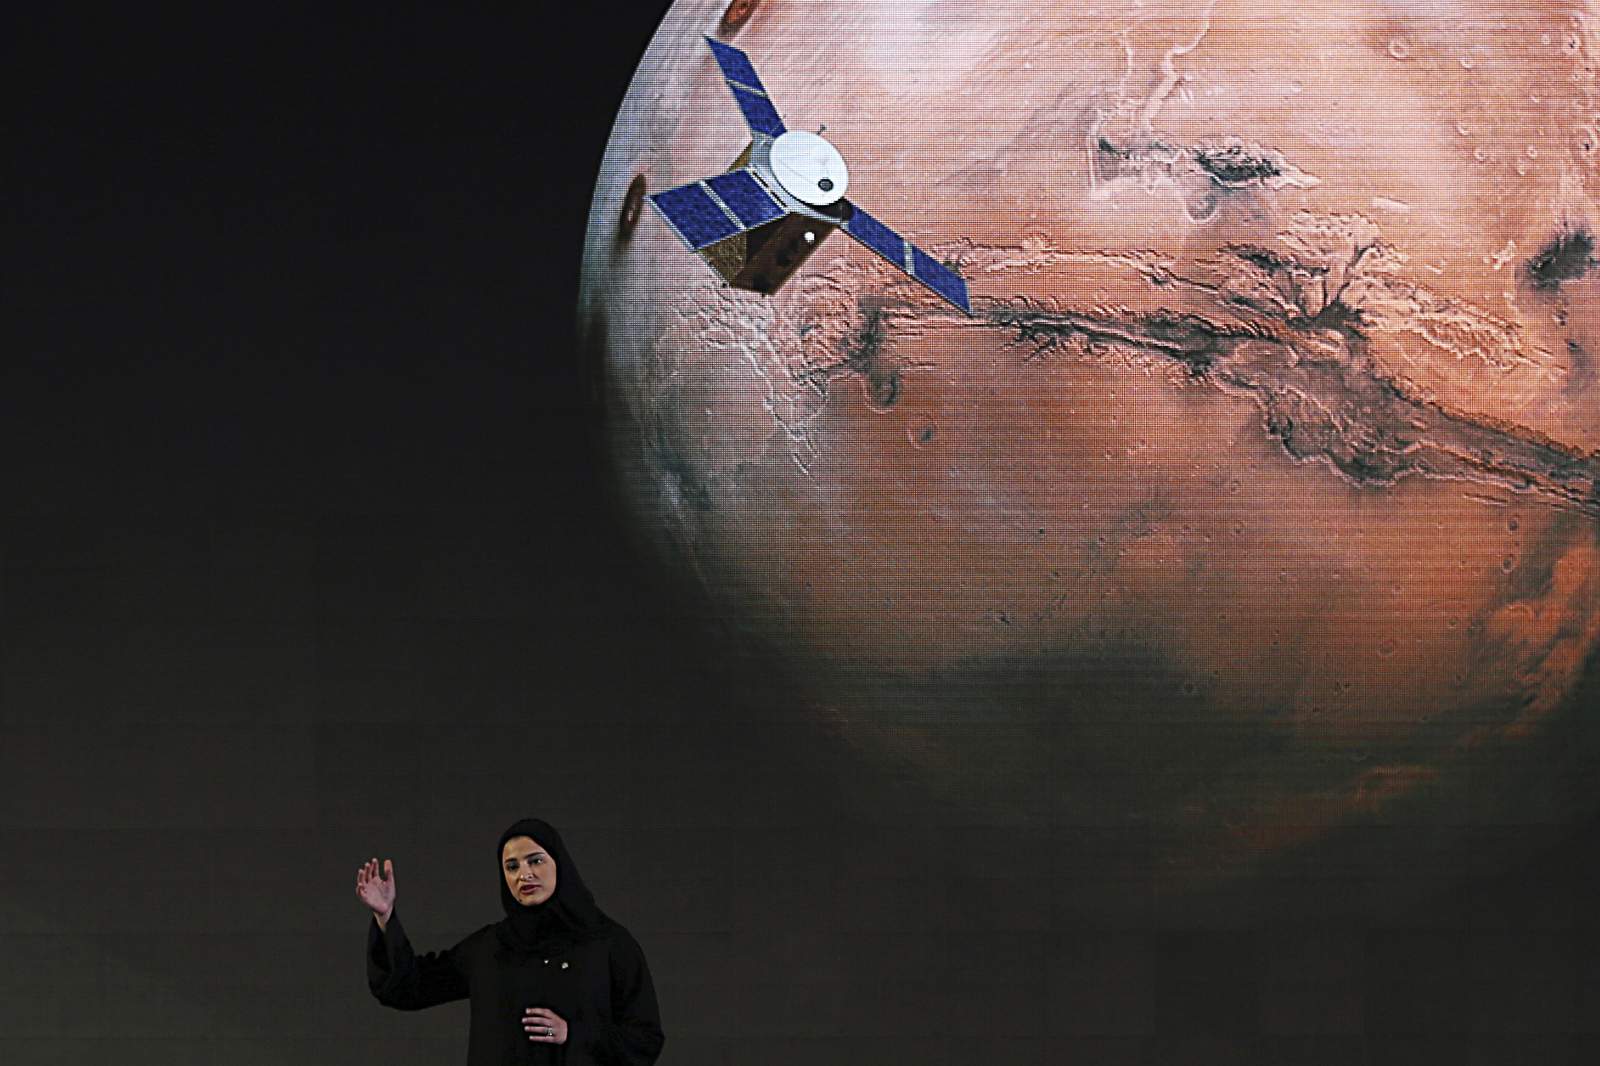 Look out, Mars: Here we come with a fleet of spacecraft